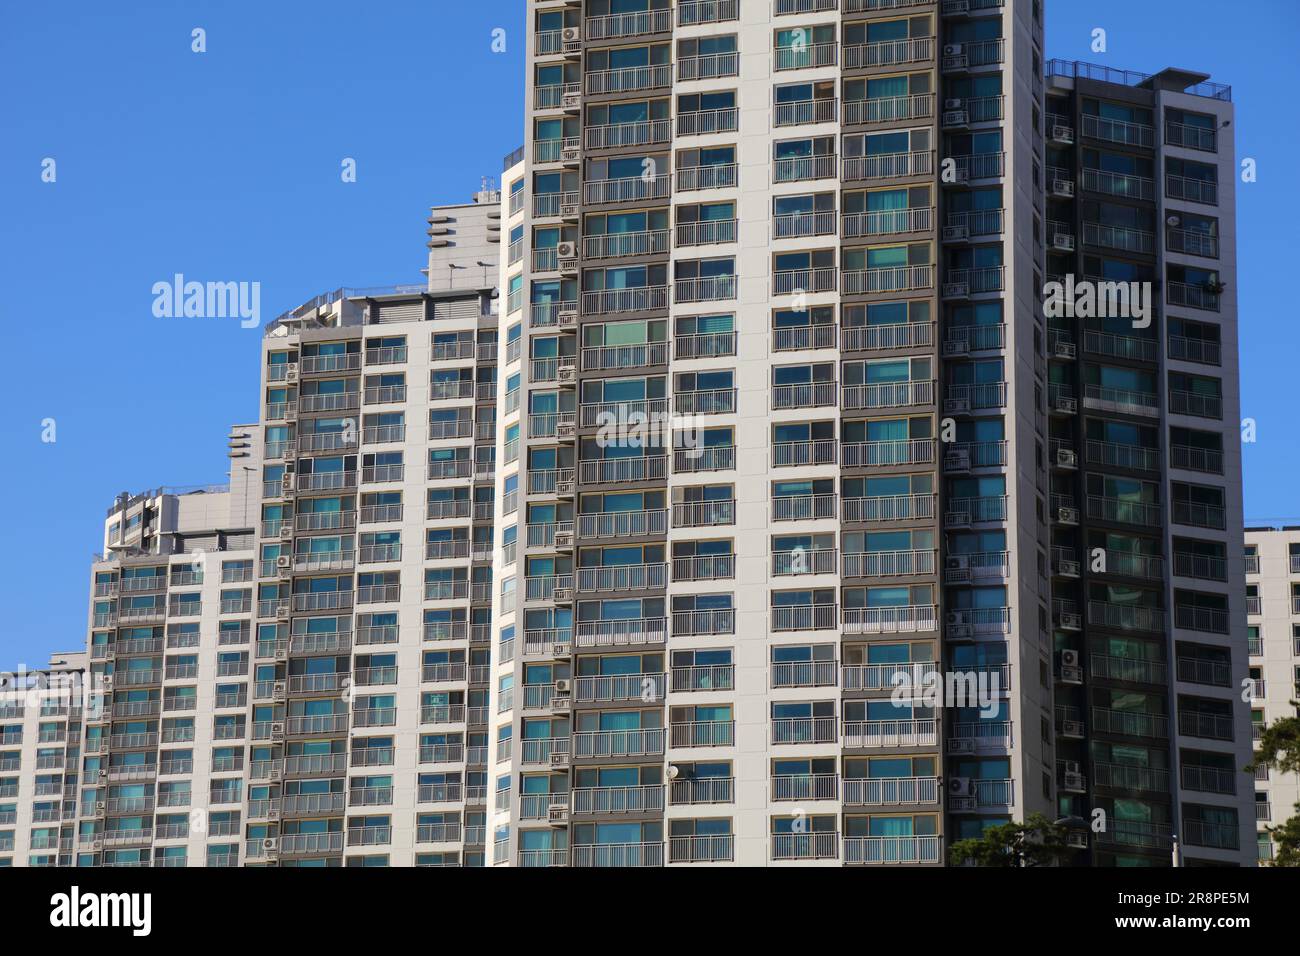 Seoul city view. Tall generic apartment buildings residential neighborhood in Jamsil district (Jamsil-dong). Stock Photo